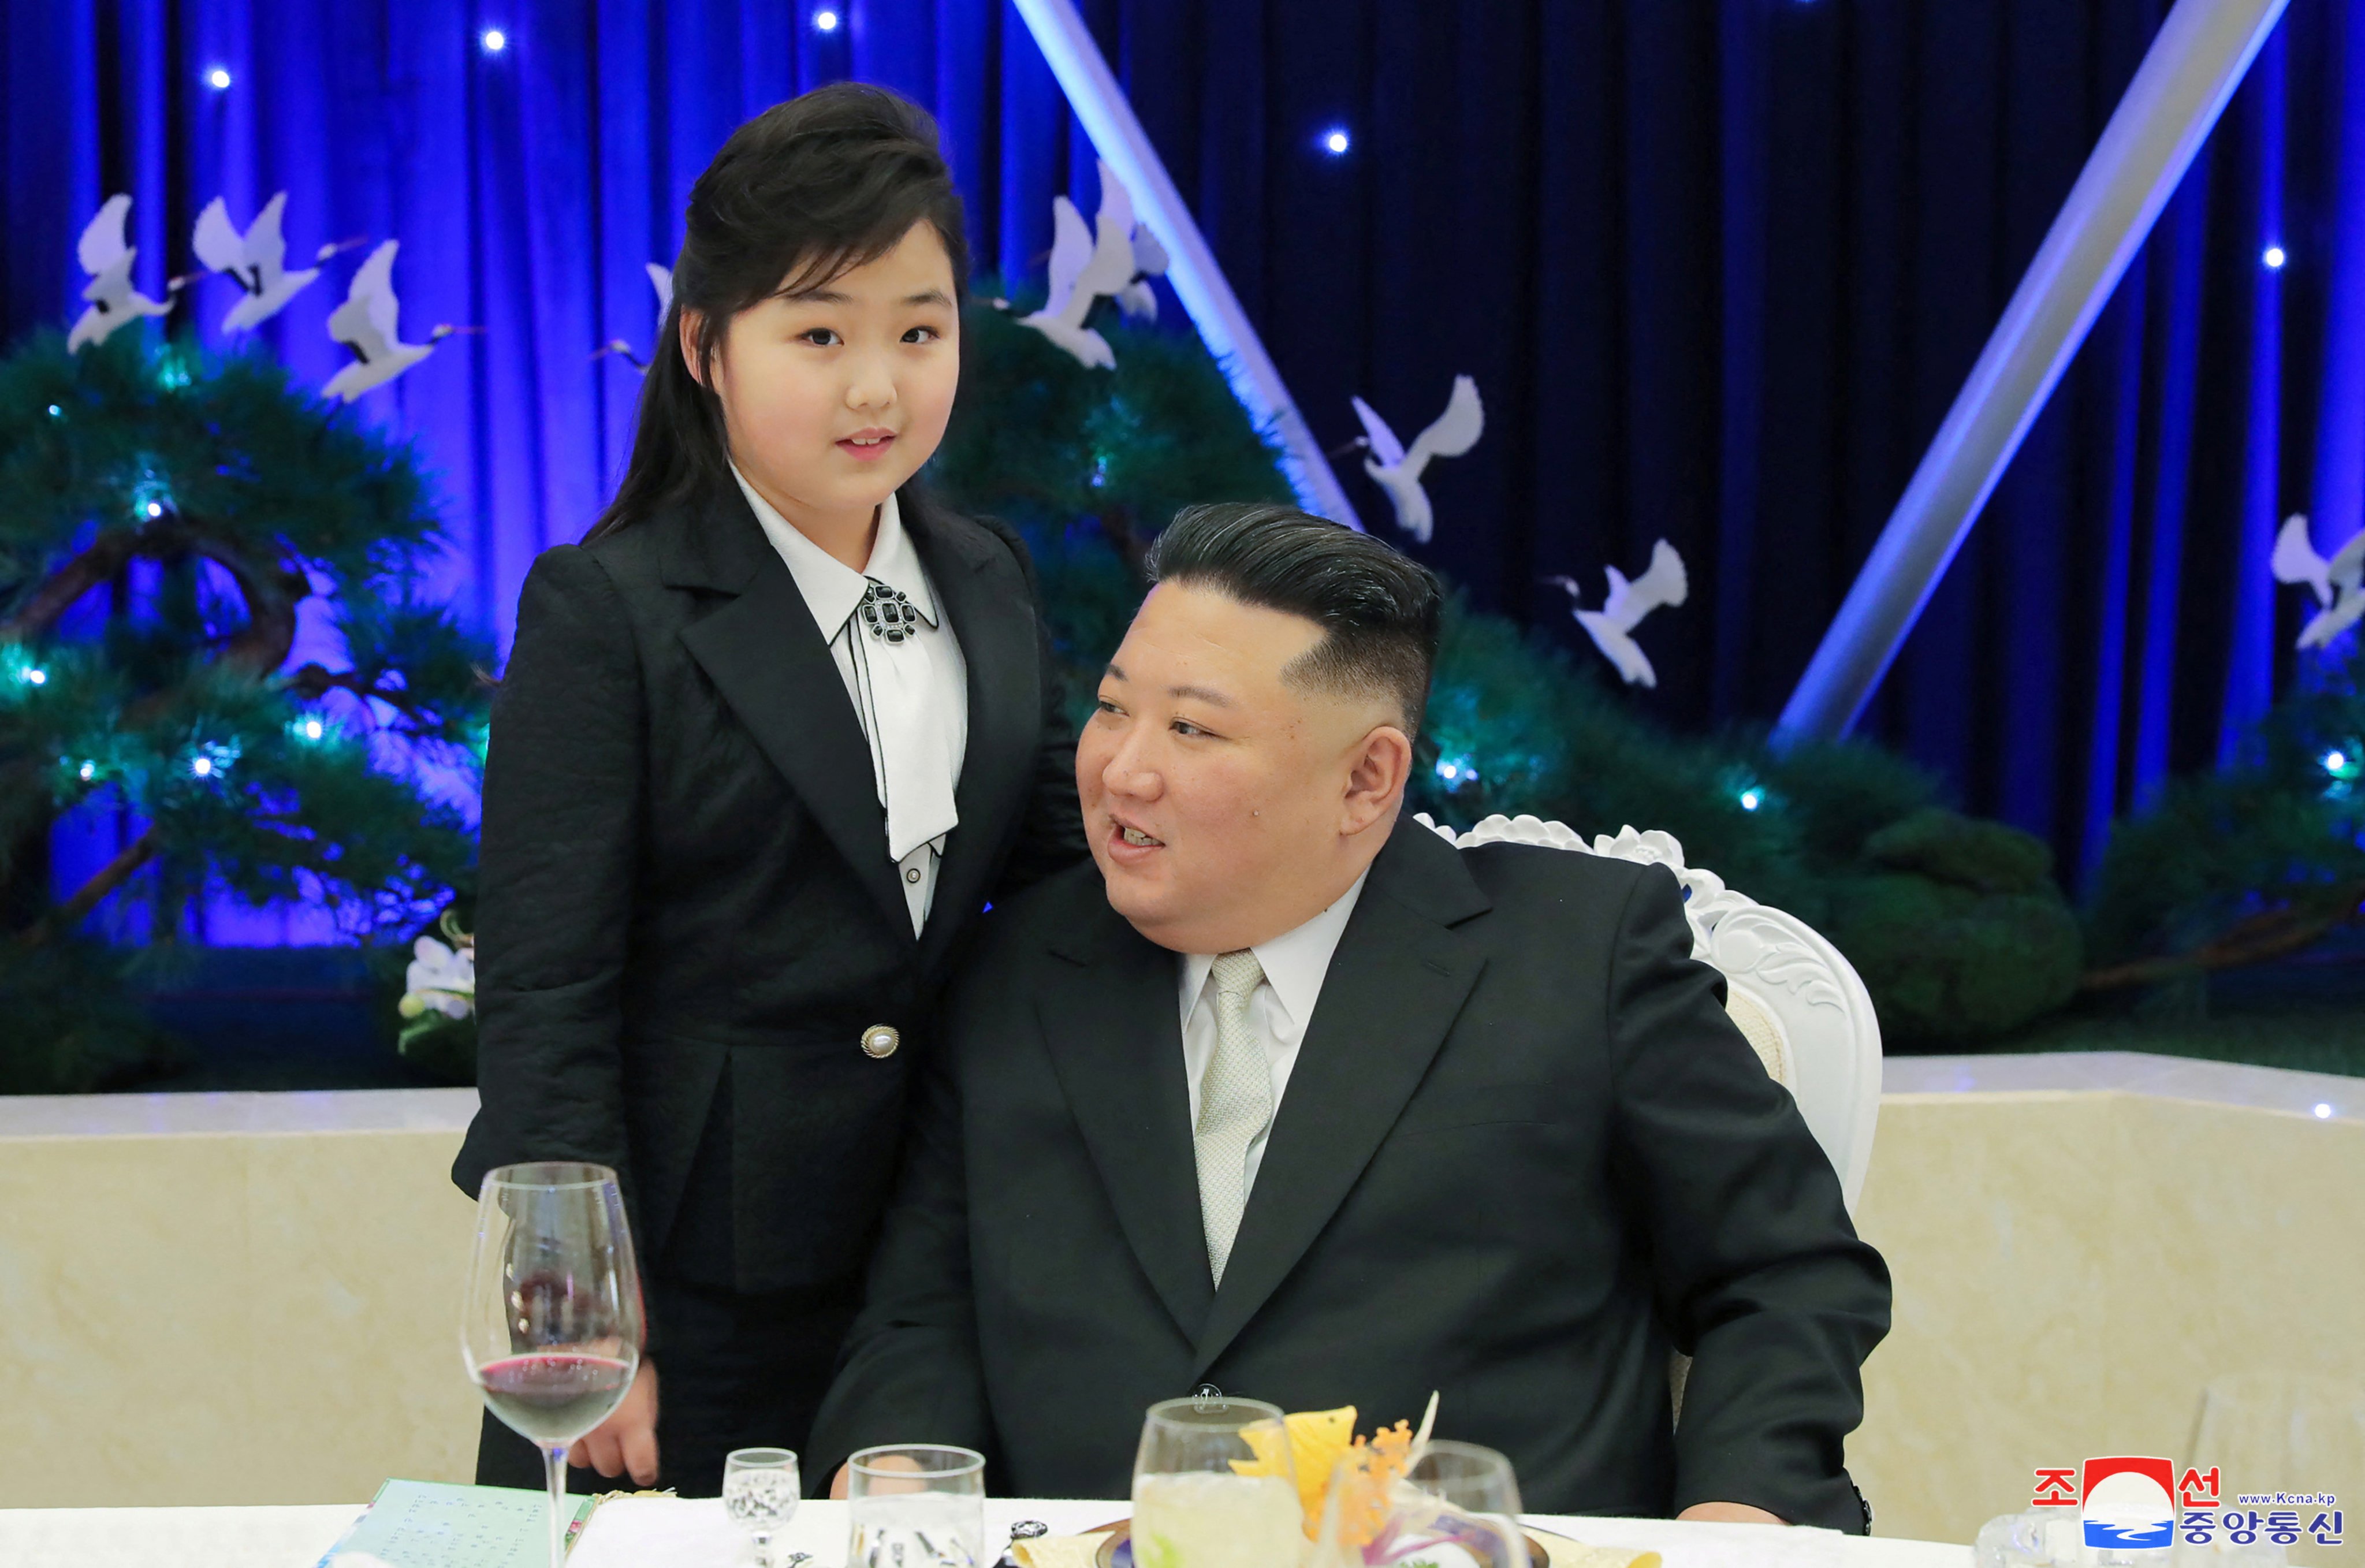 North Korean leader Kim Jong-un with his daughter Kim Ju-ae at a banquet to celebrate the 75th anniversary of the Korean People’s Army, in Pyongyang, North Korea in this photo released on February 8. Photo: KCNA via Reuters